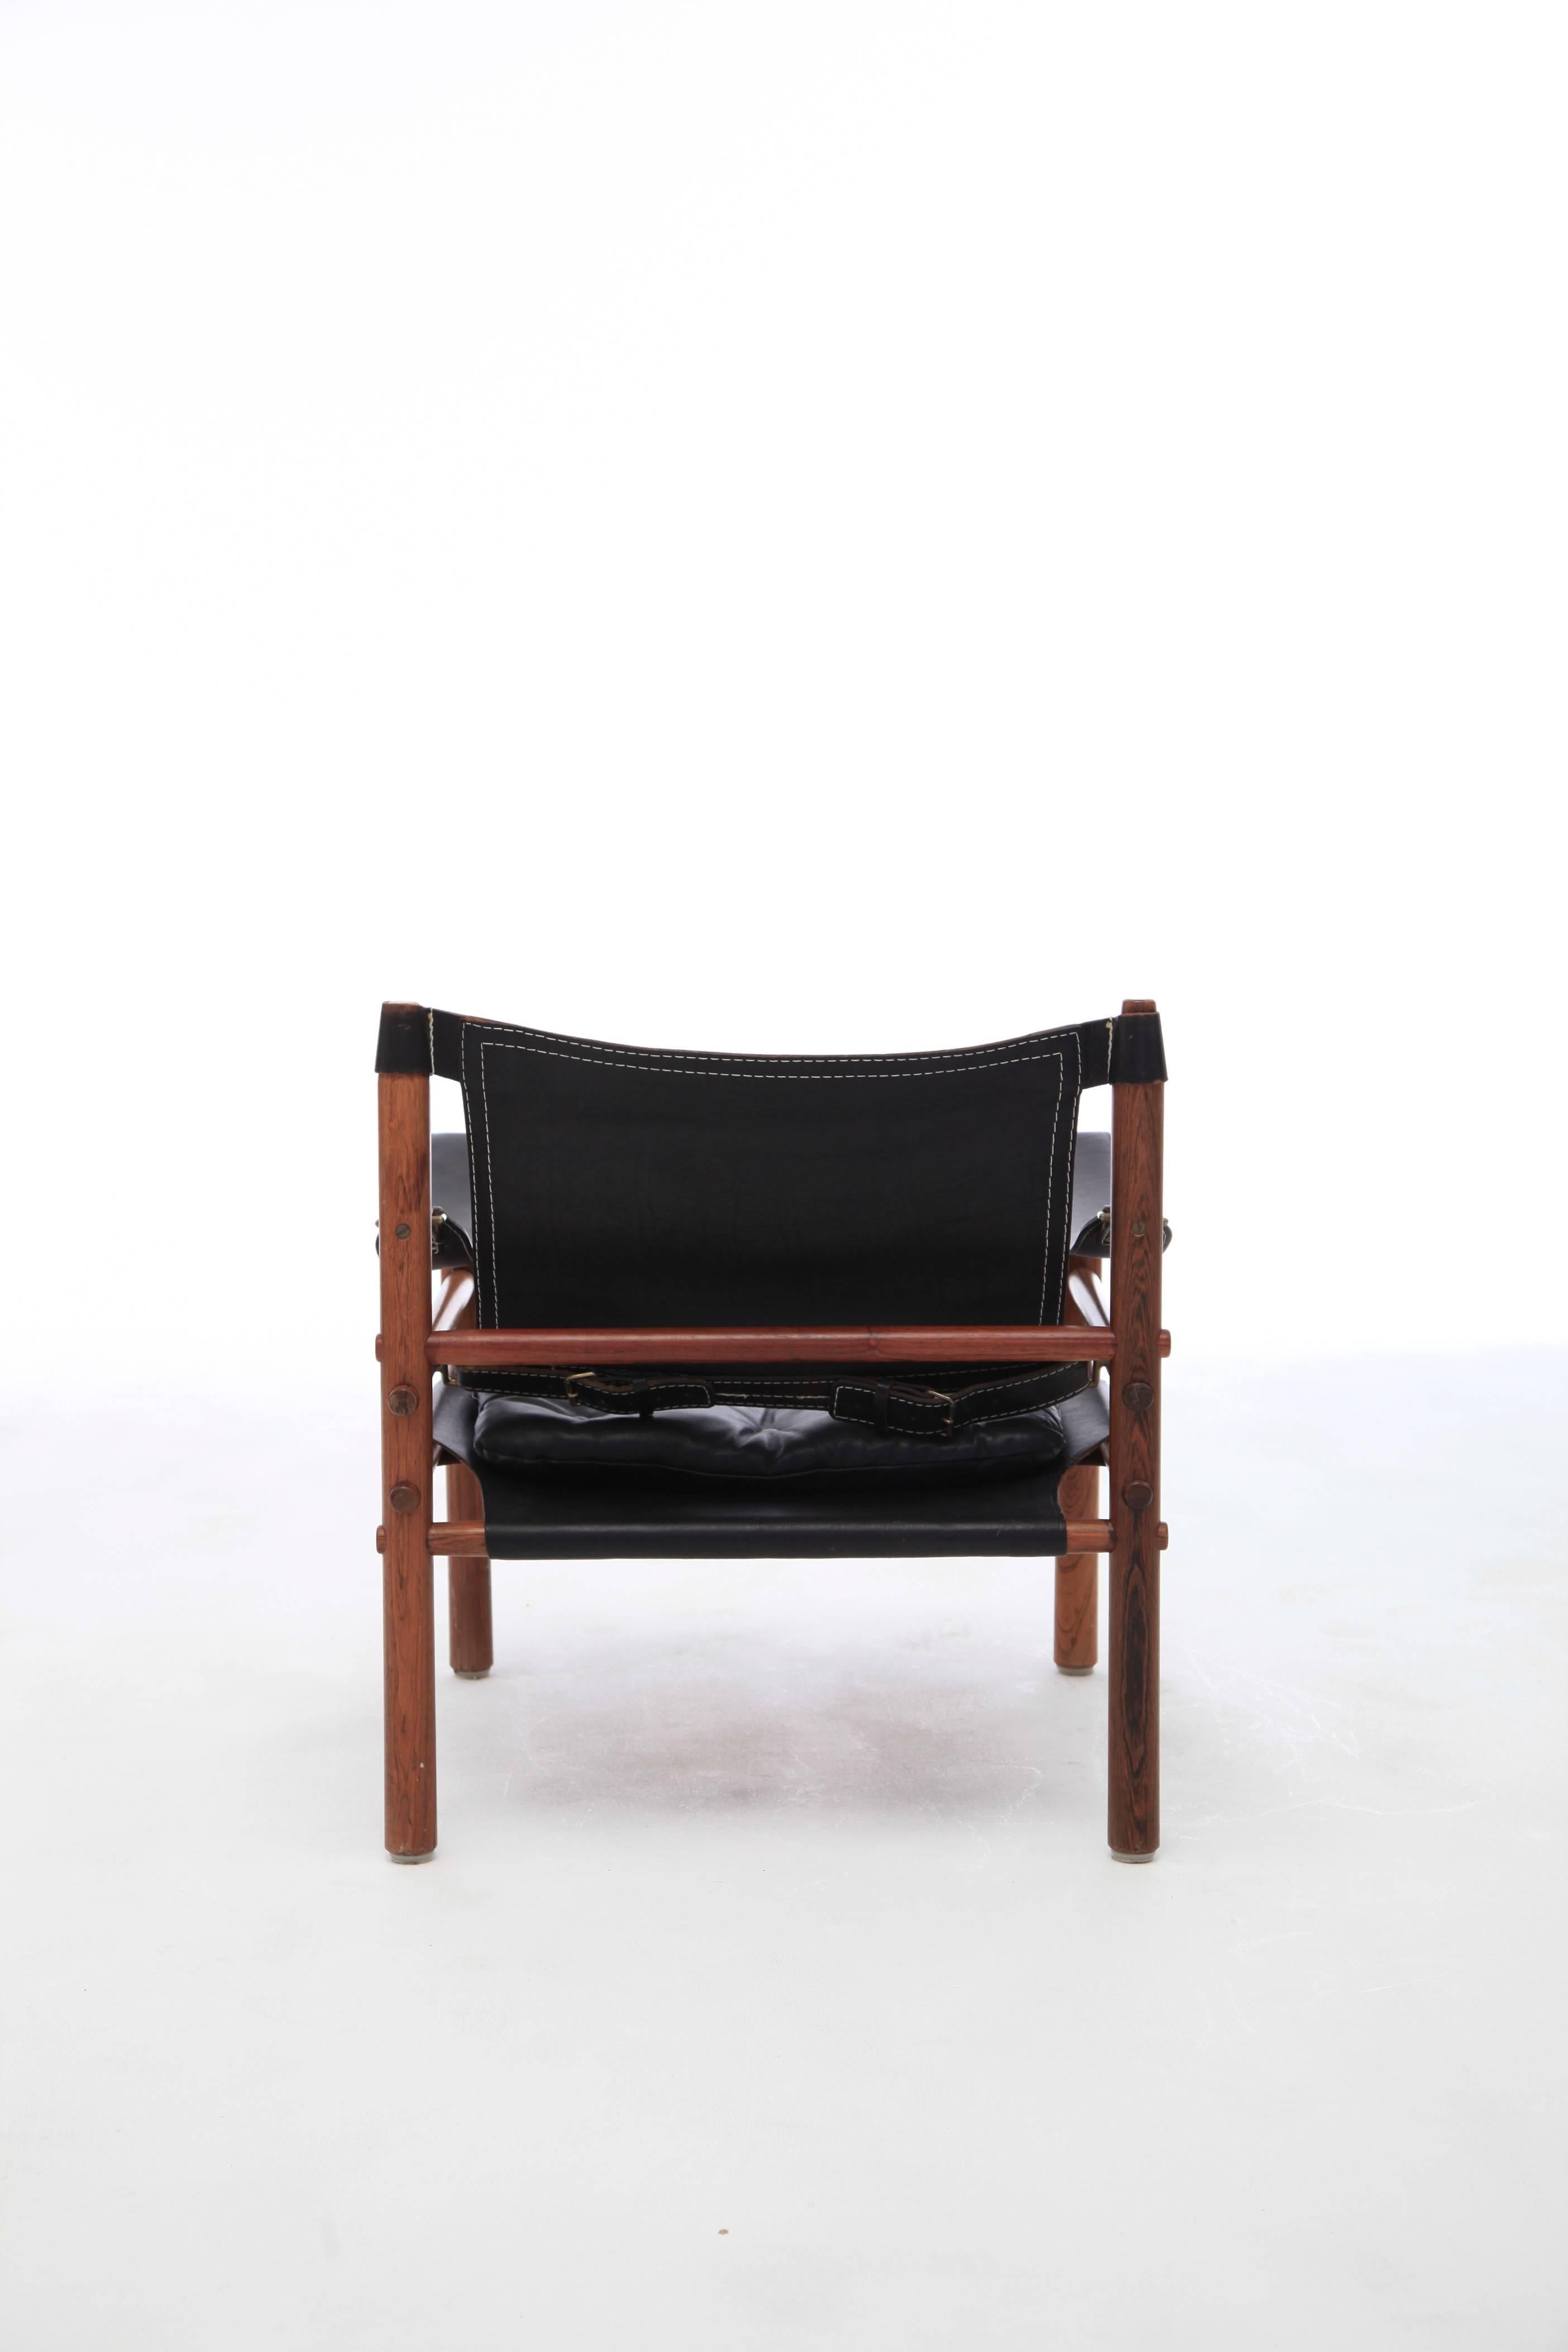 20th Century Arne Norell Black Leather and Rosewood Safari Sirocco Chair, Sweden, 1960s